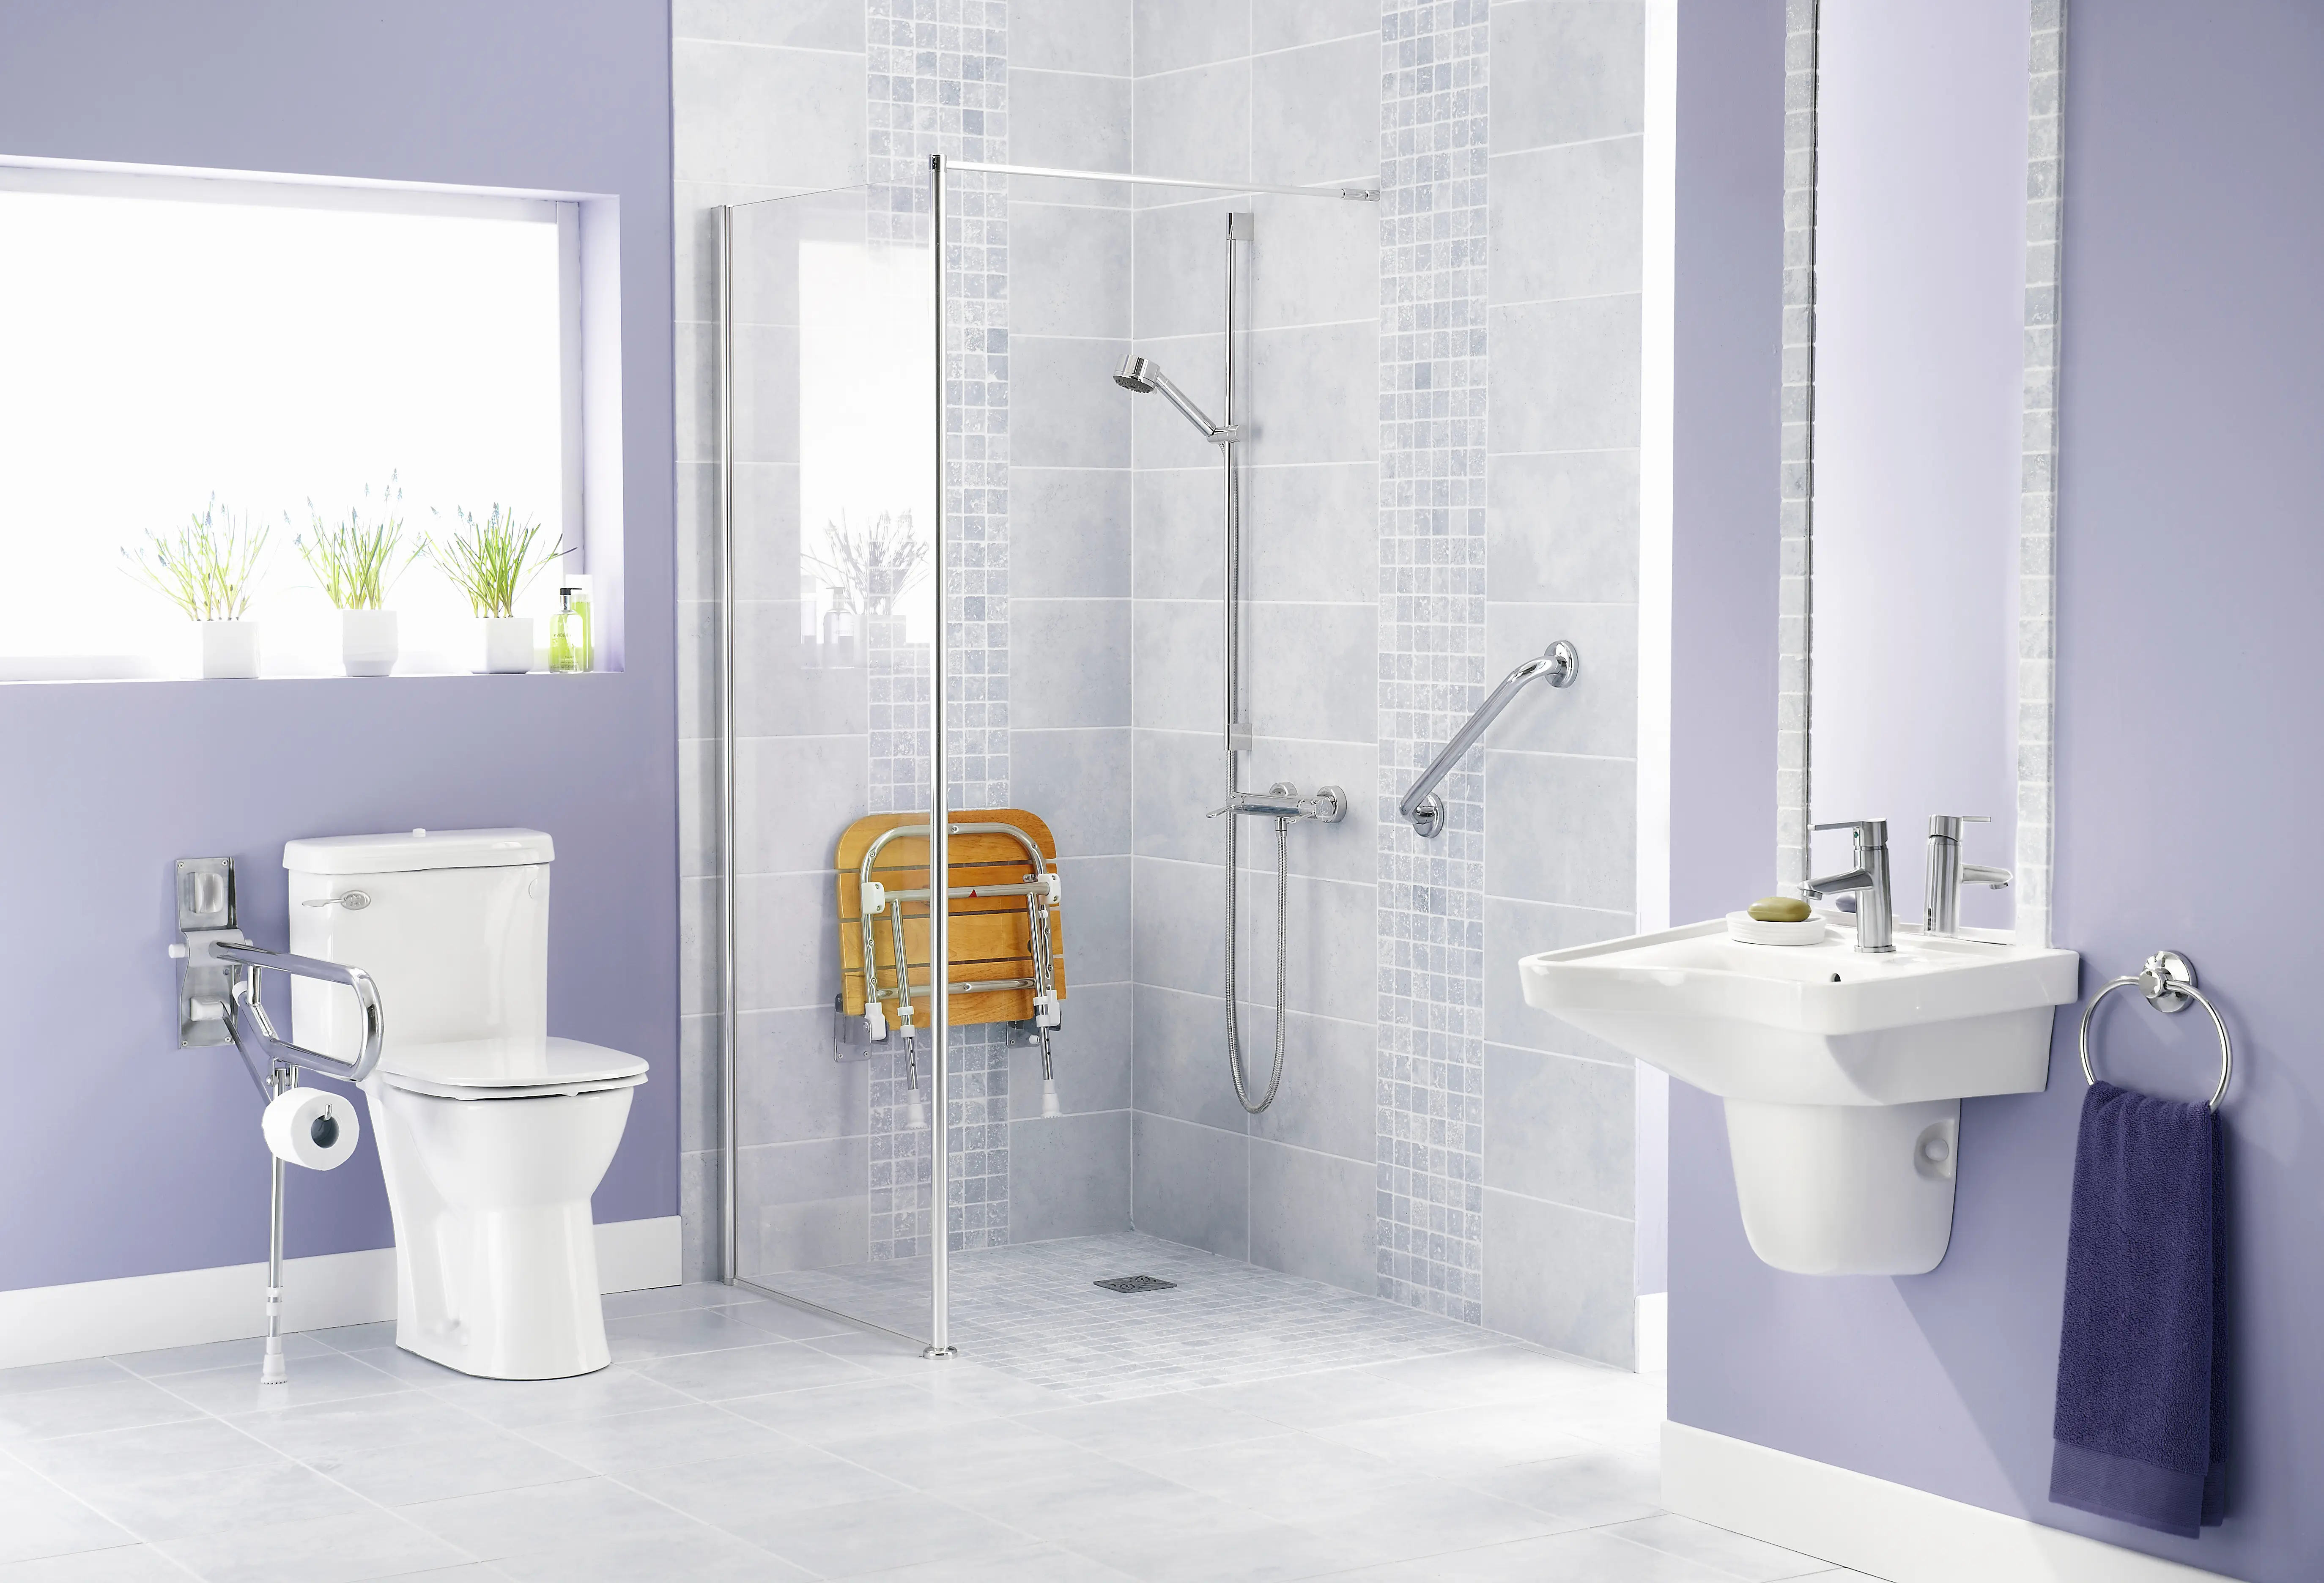 A step-in shower and bathroom equipped with safety and mobility items.